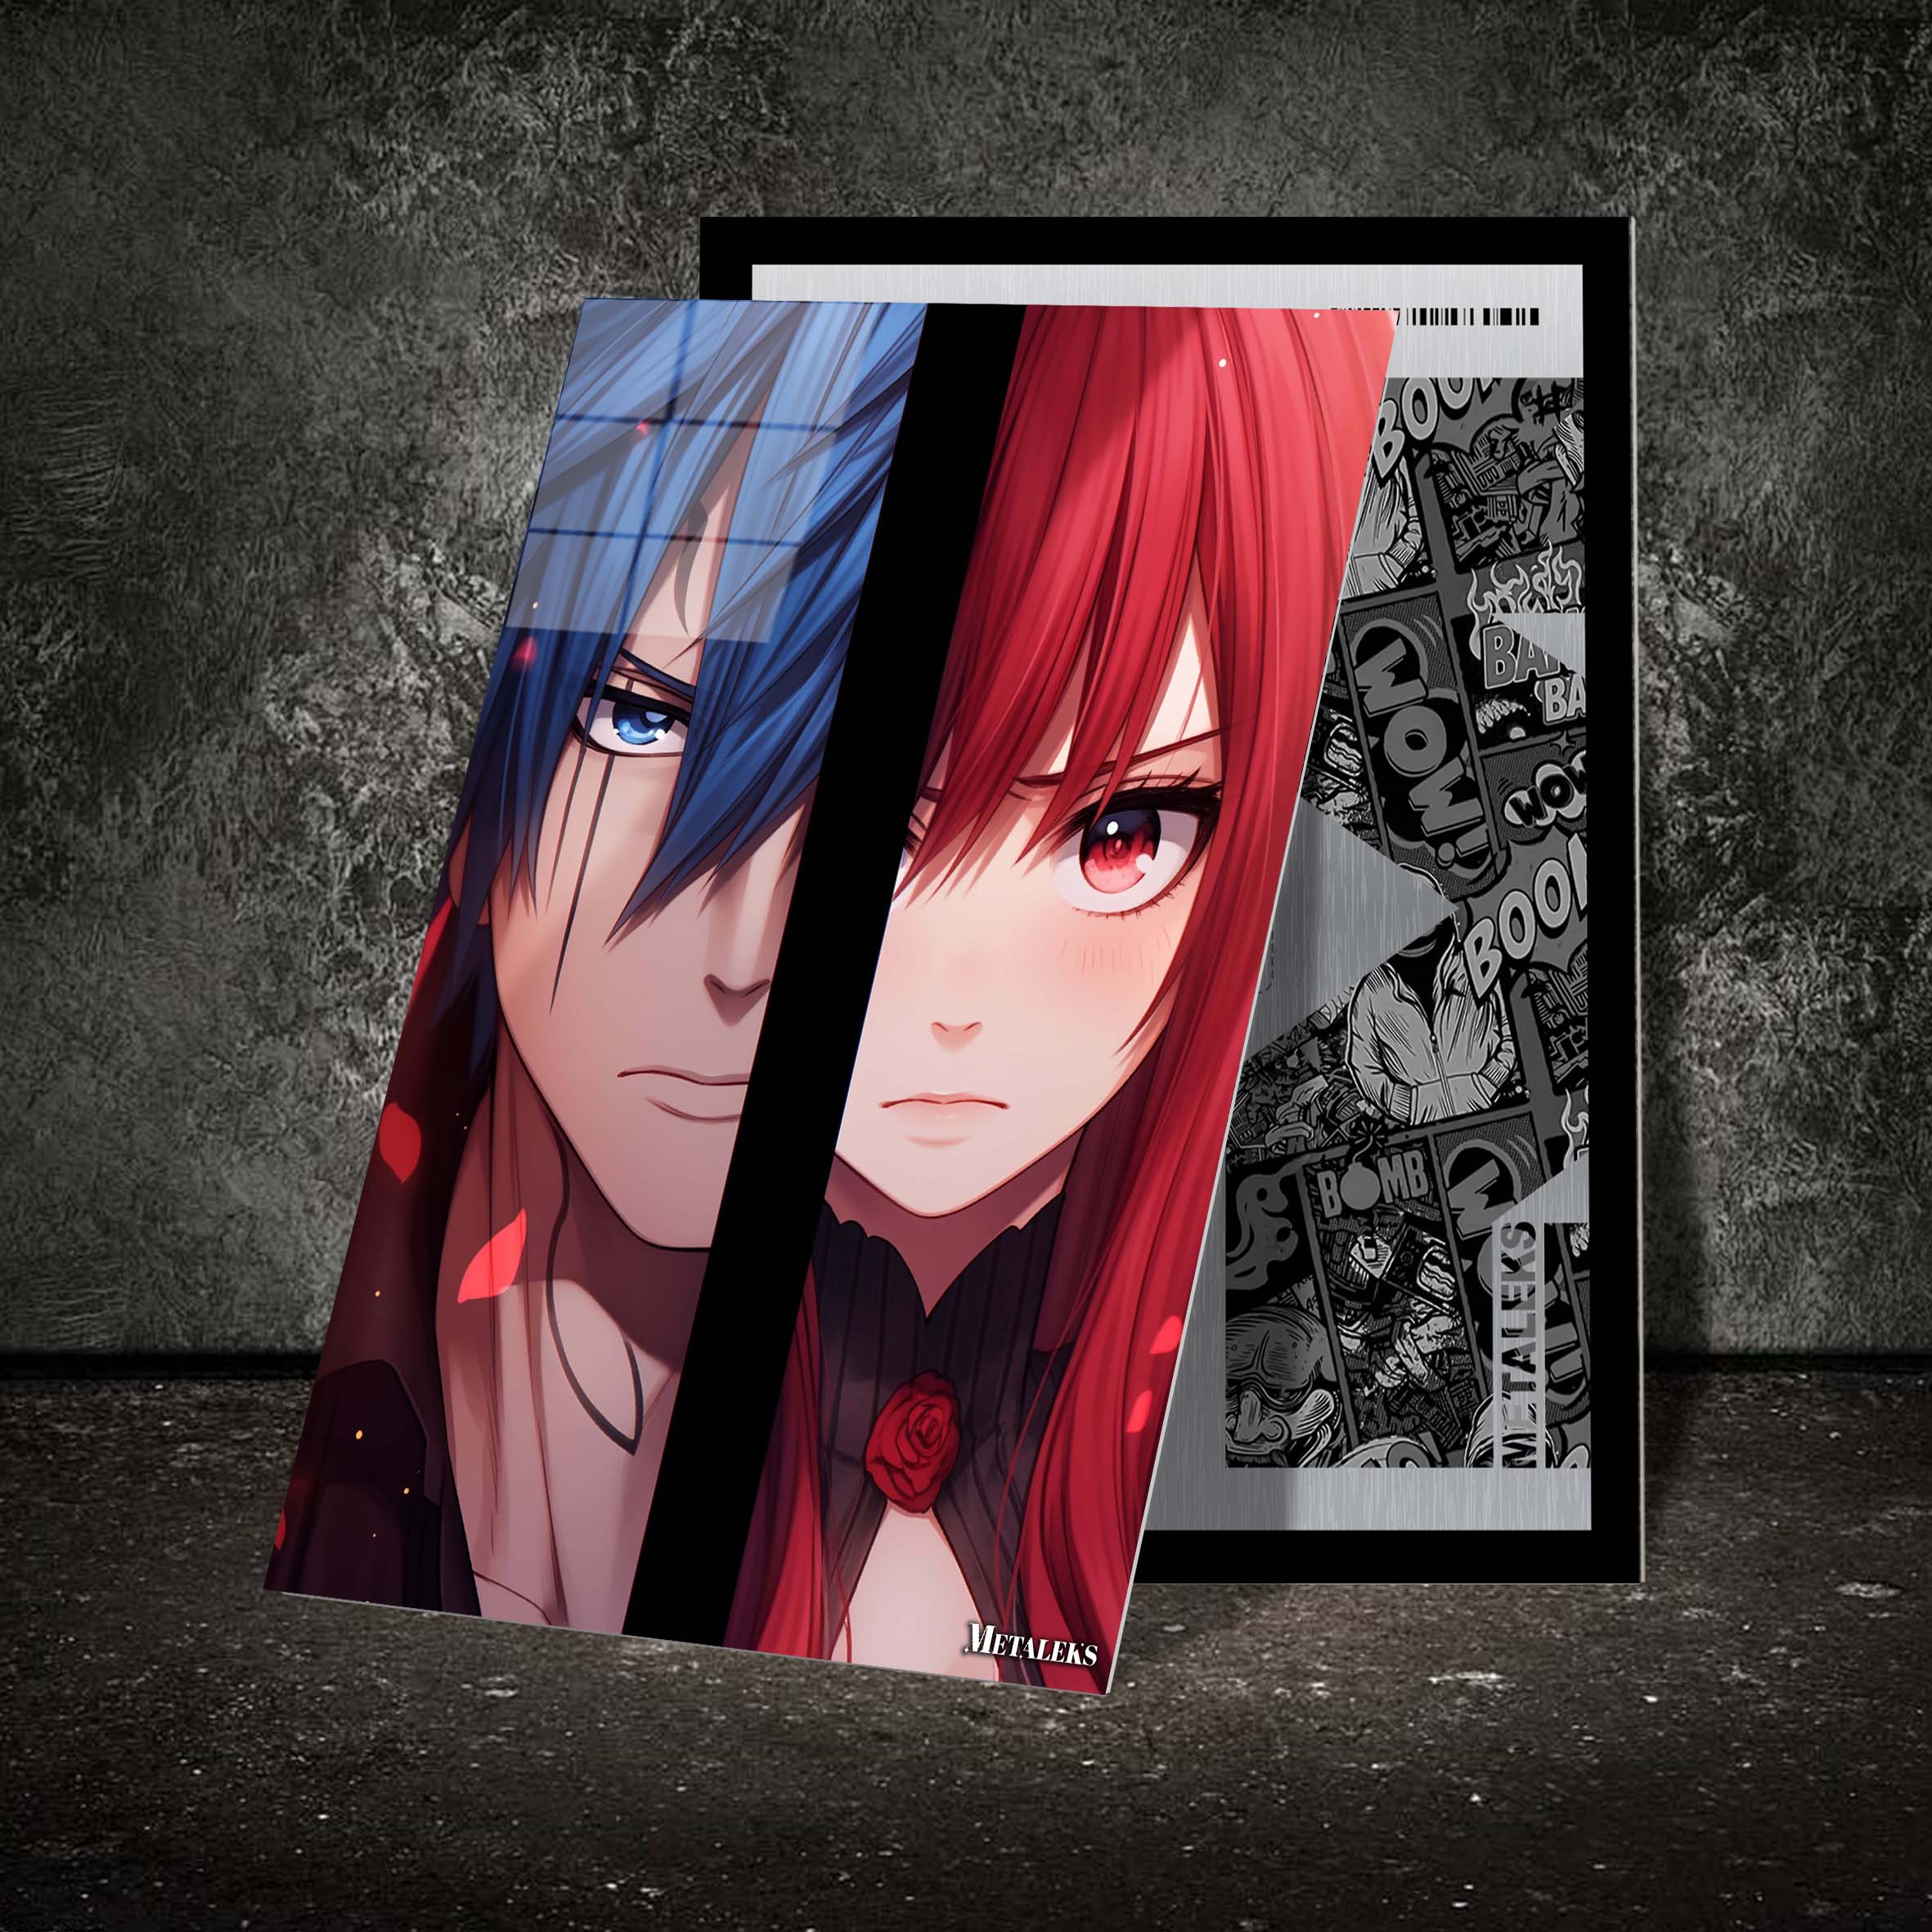 Fairy Tail's Starcrossed_ Jellal and Erza's Heavenly Alliance-designed by @theanimecrossover